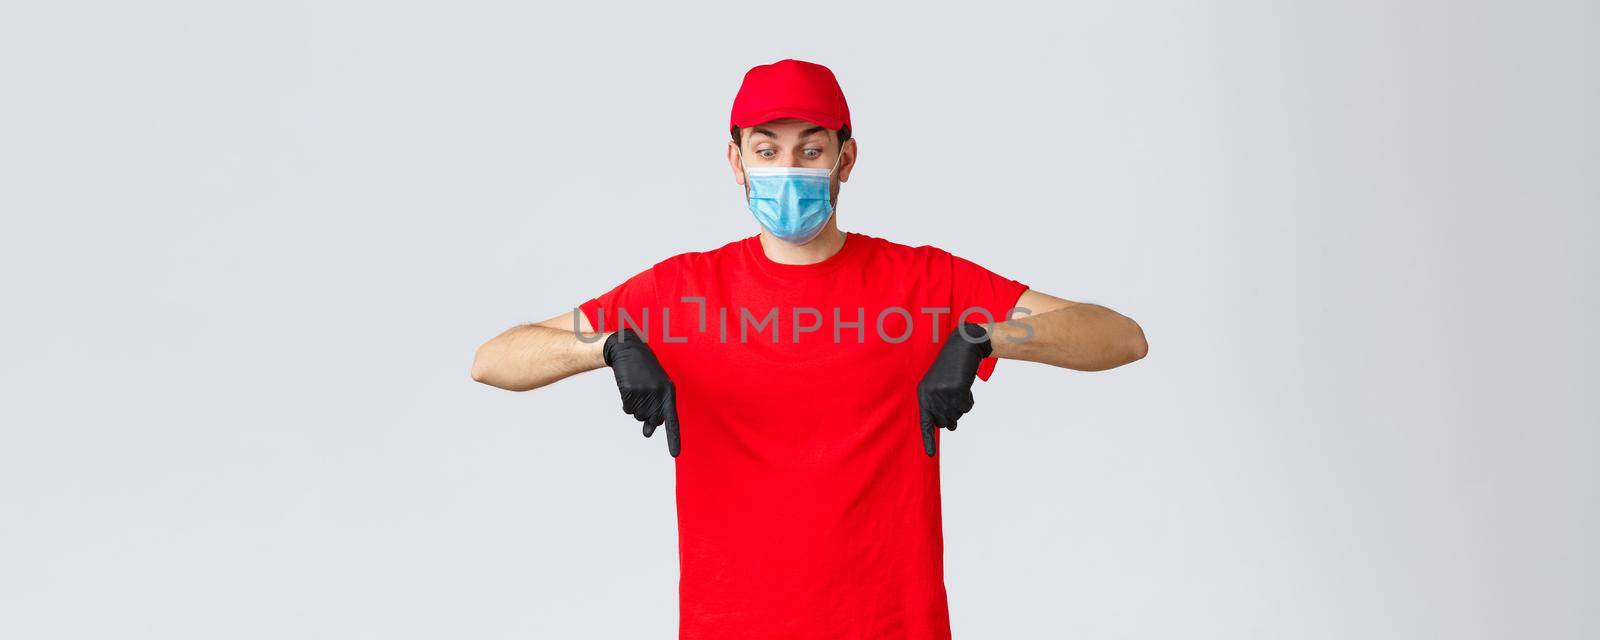 Covid-19, self-quarantine, online shopping and shipping concept. Startled and shocked courier in uniform, red cap and t-shirt, wearing safety measures medical mask and gloves, pointing down.